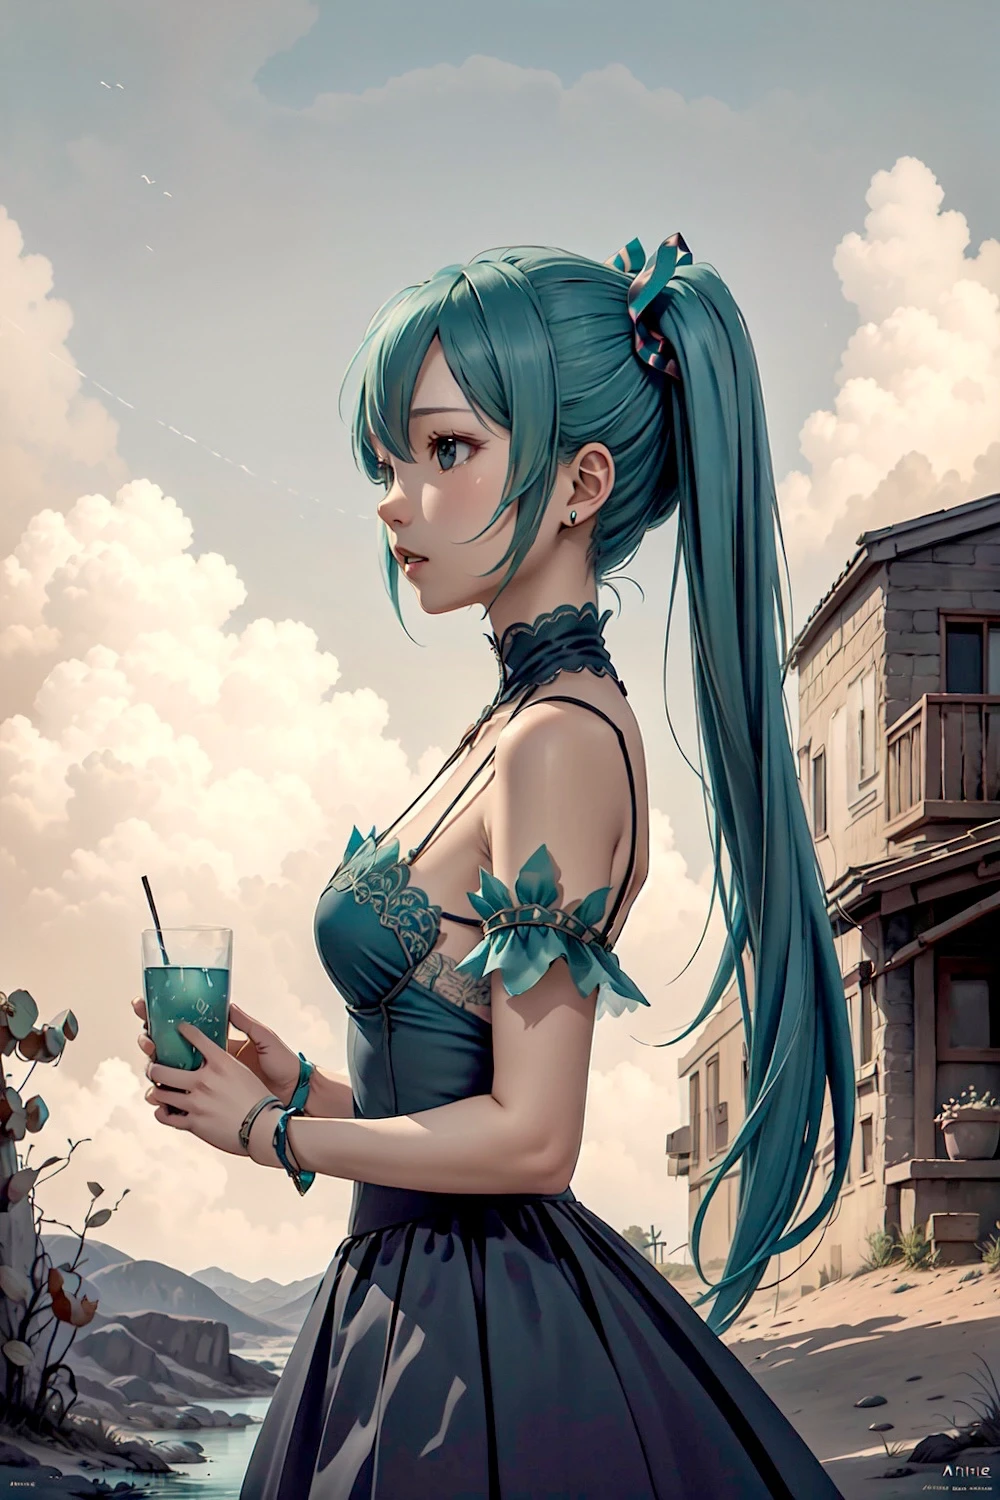 hatsune-miku-anime-style-all-ages-40